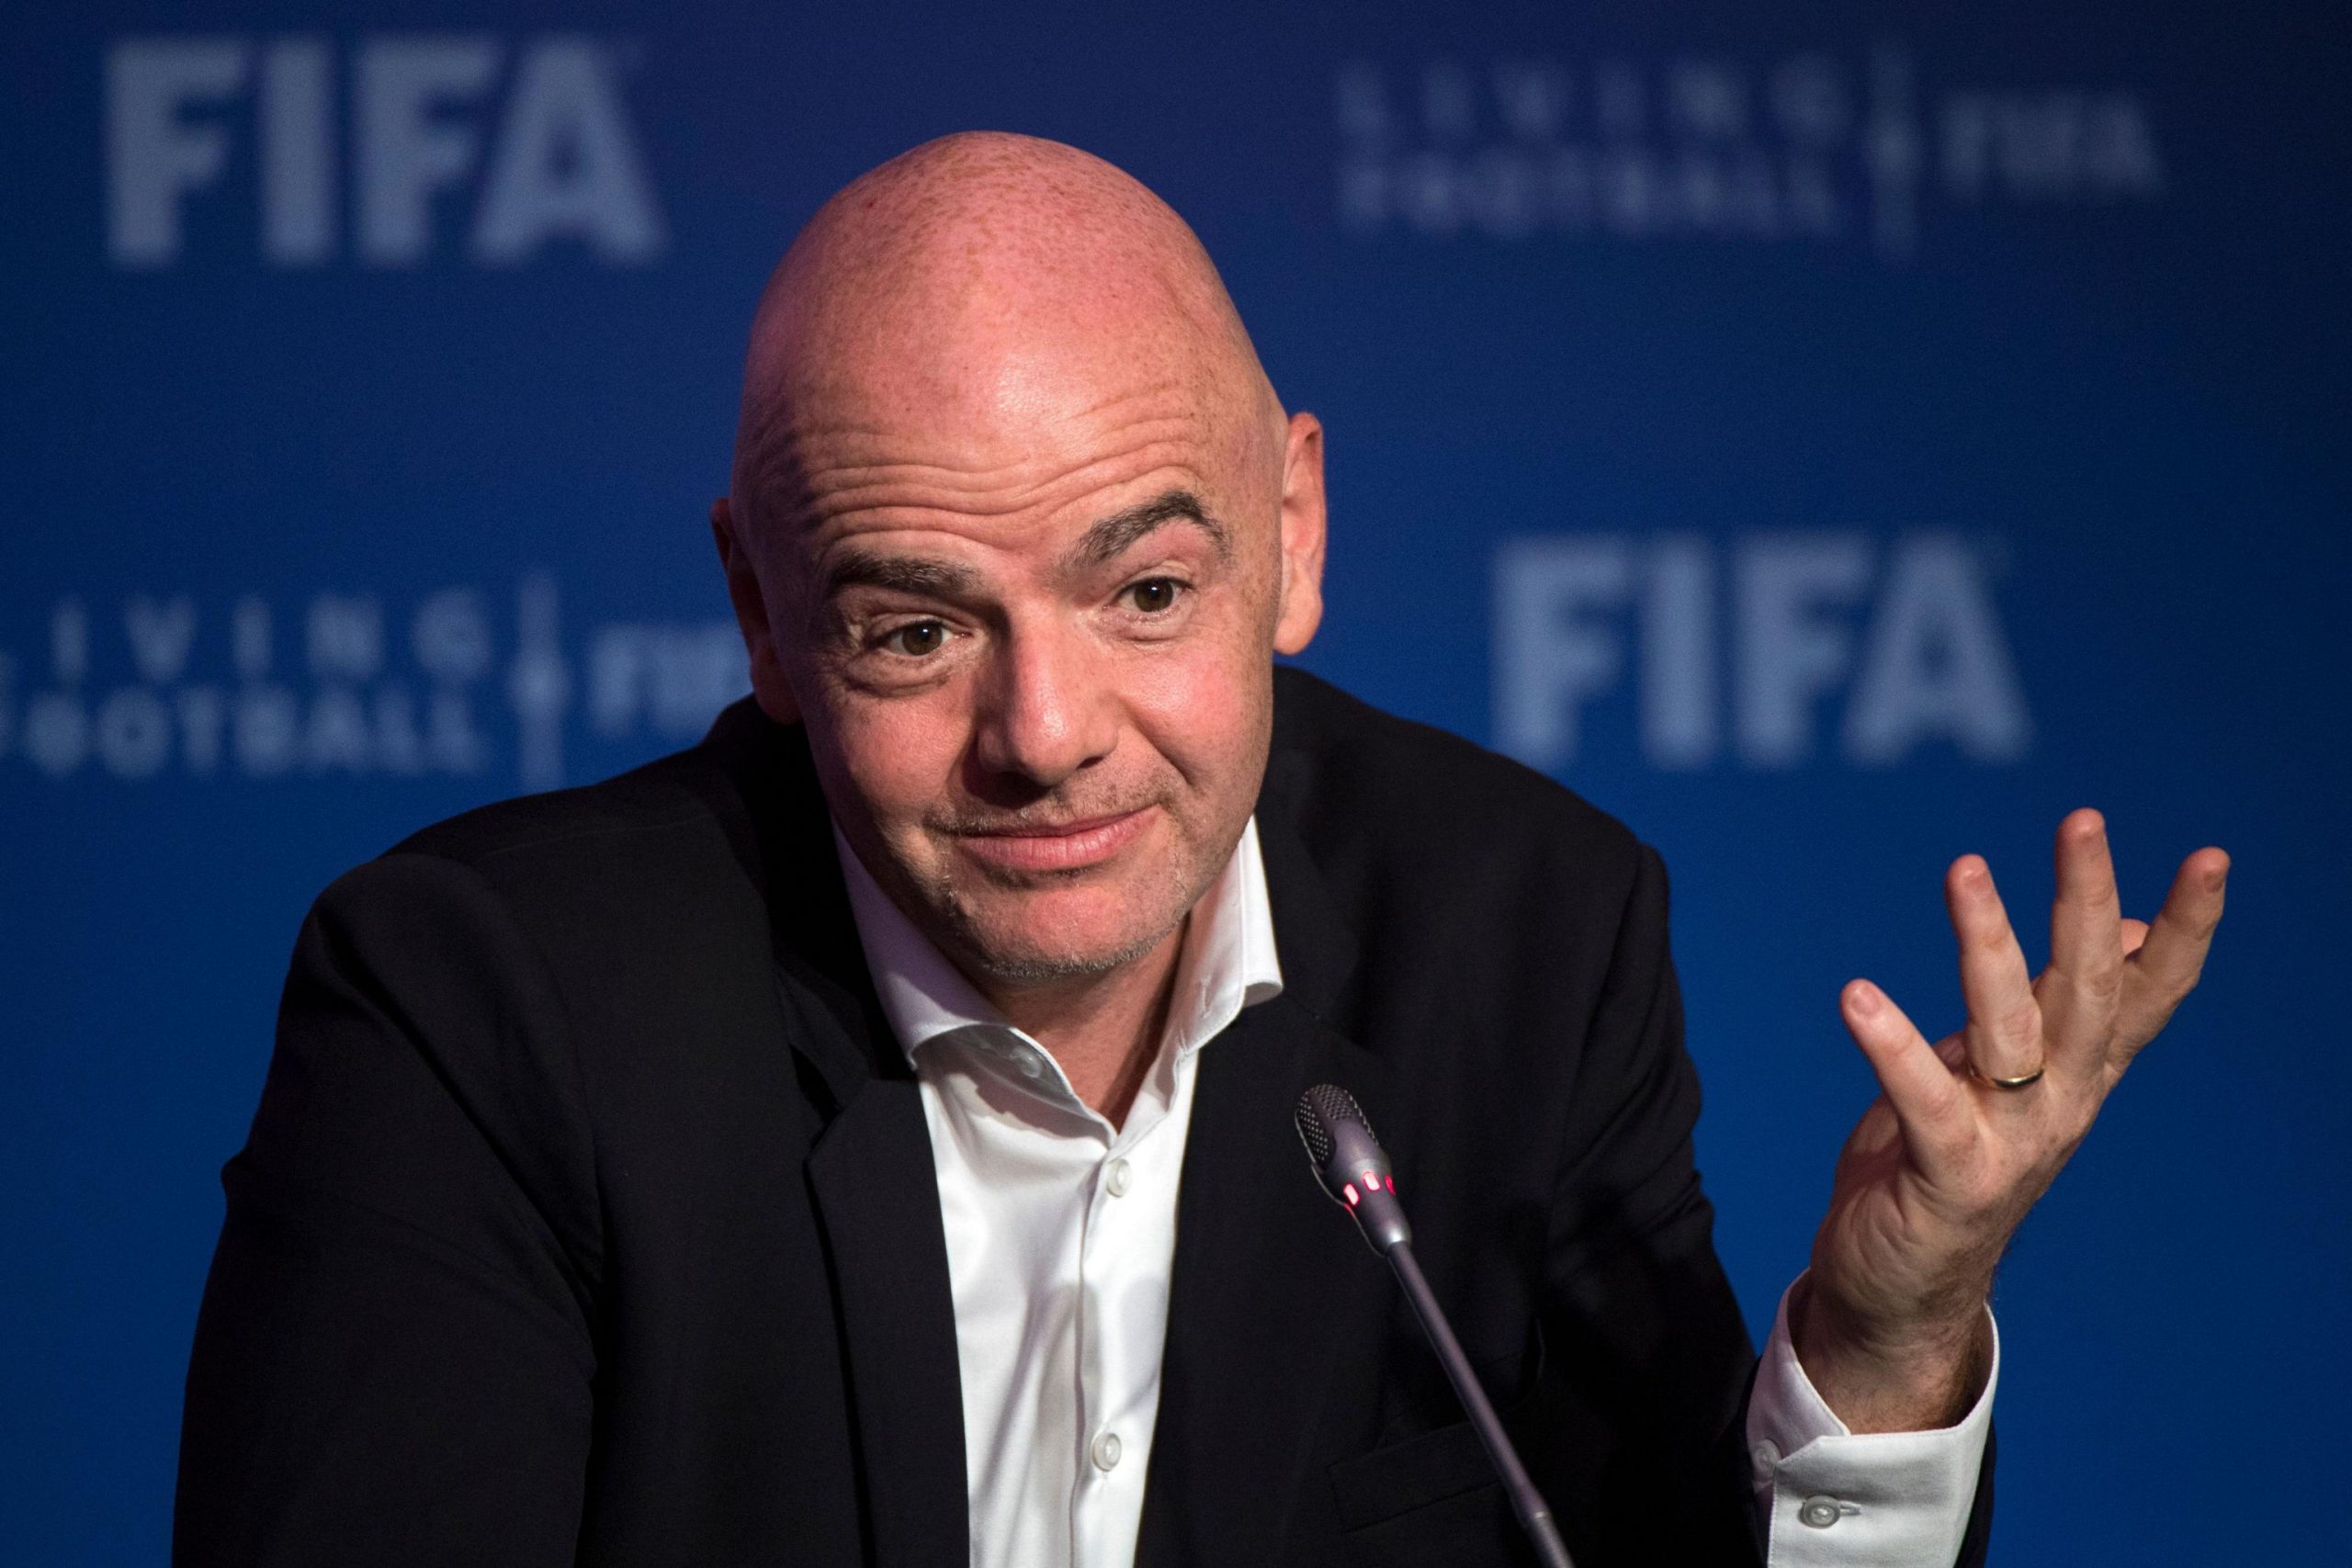 Why did the FIFA president and his family move to Doha?